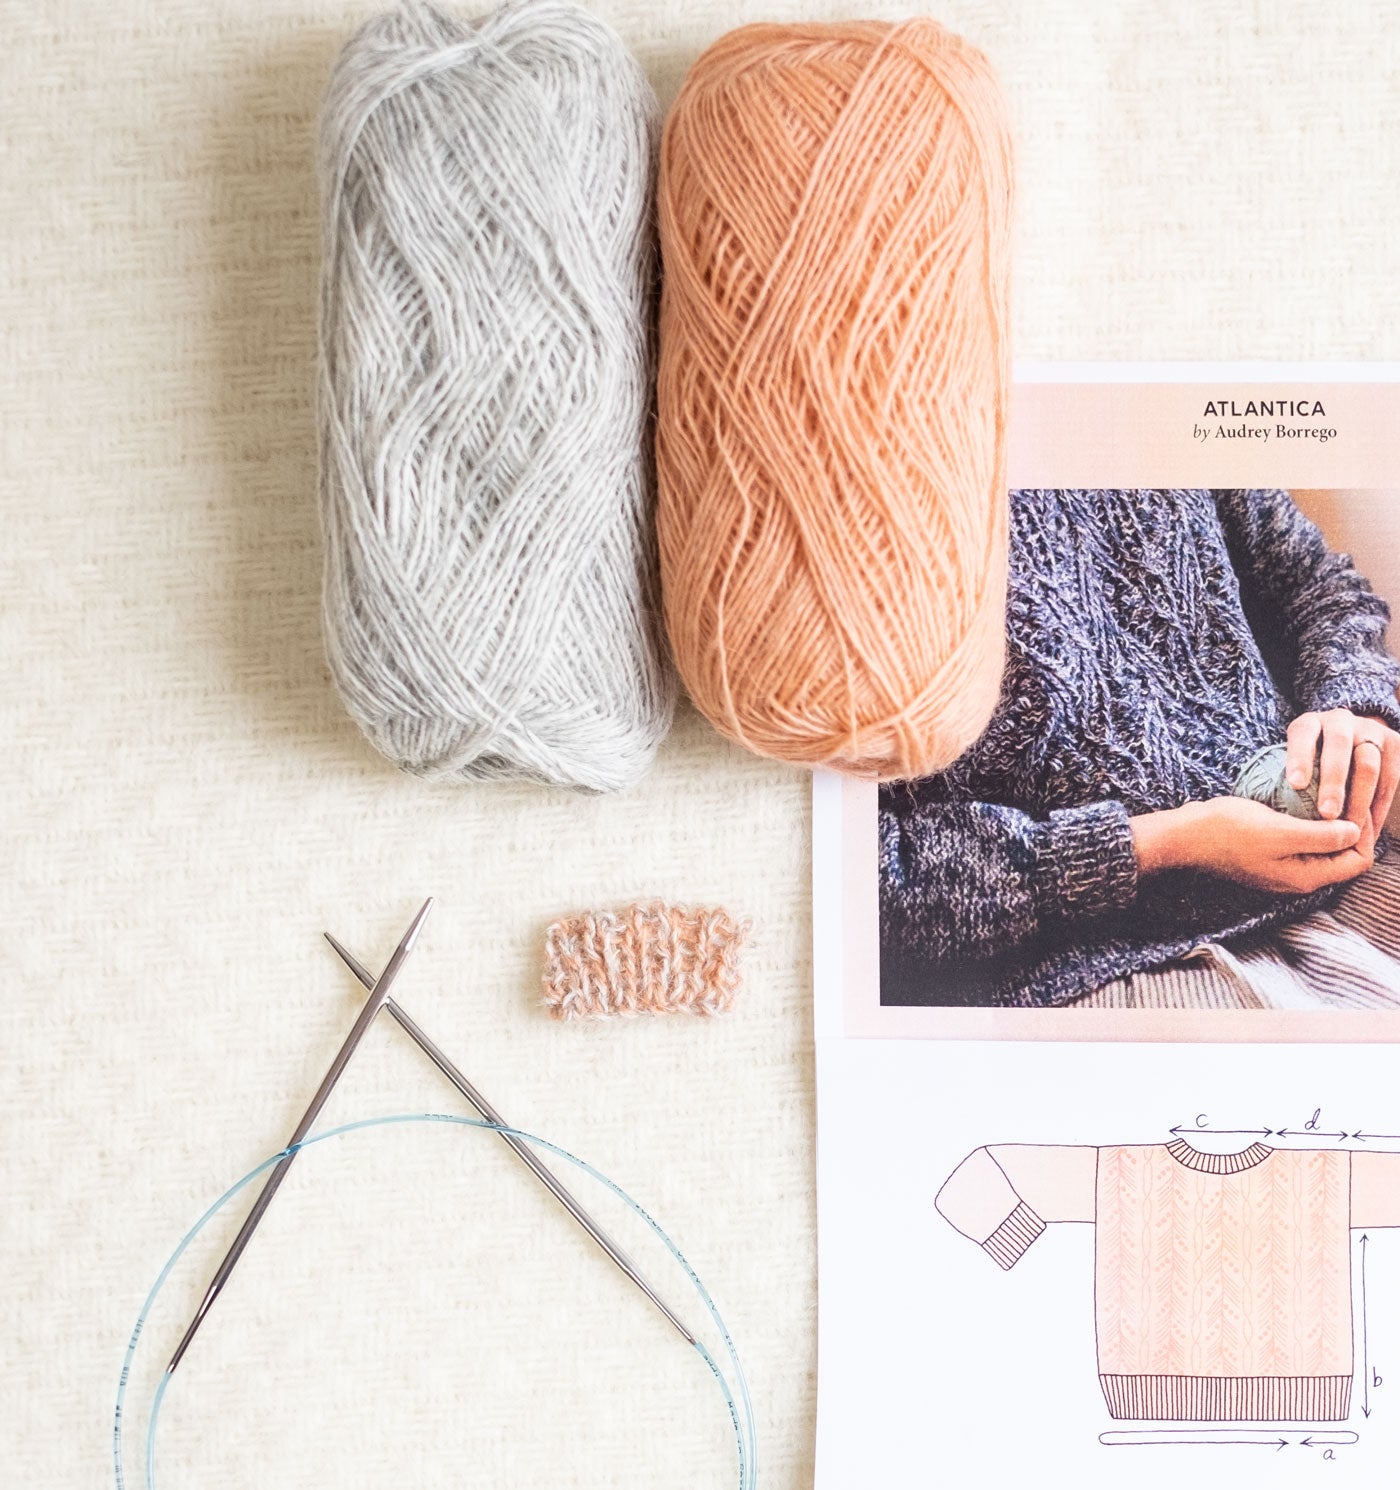 A ball of Light Ash Heather and a ball of Peach Einband yarn lay atop a printed page of the Atlantica Pullover pattern. A pair of stainless steel circular knitting needles and a small swatch of the two hues marled together lay next to the pattern page.  